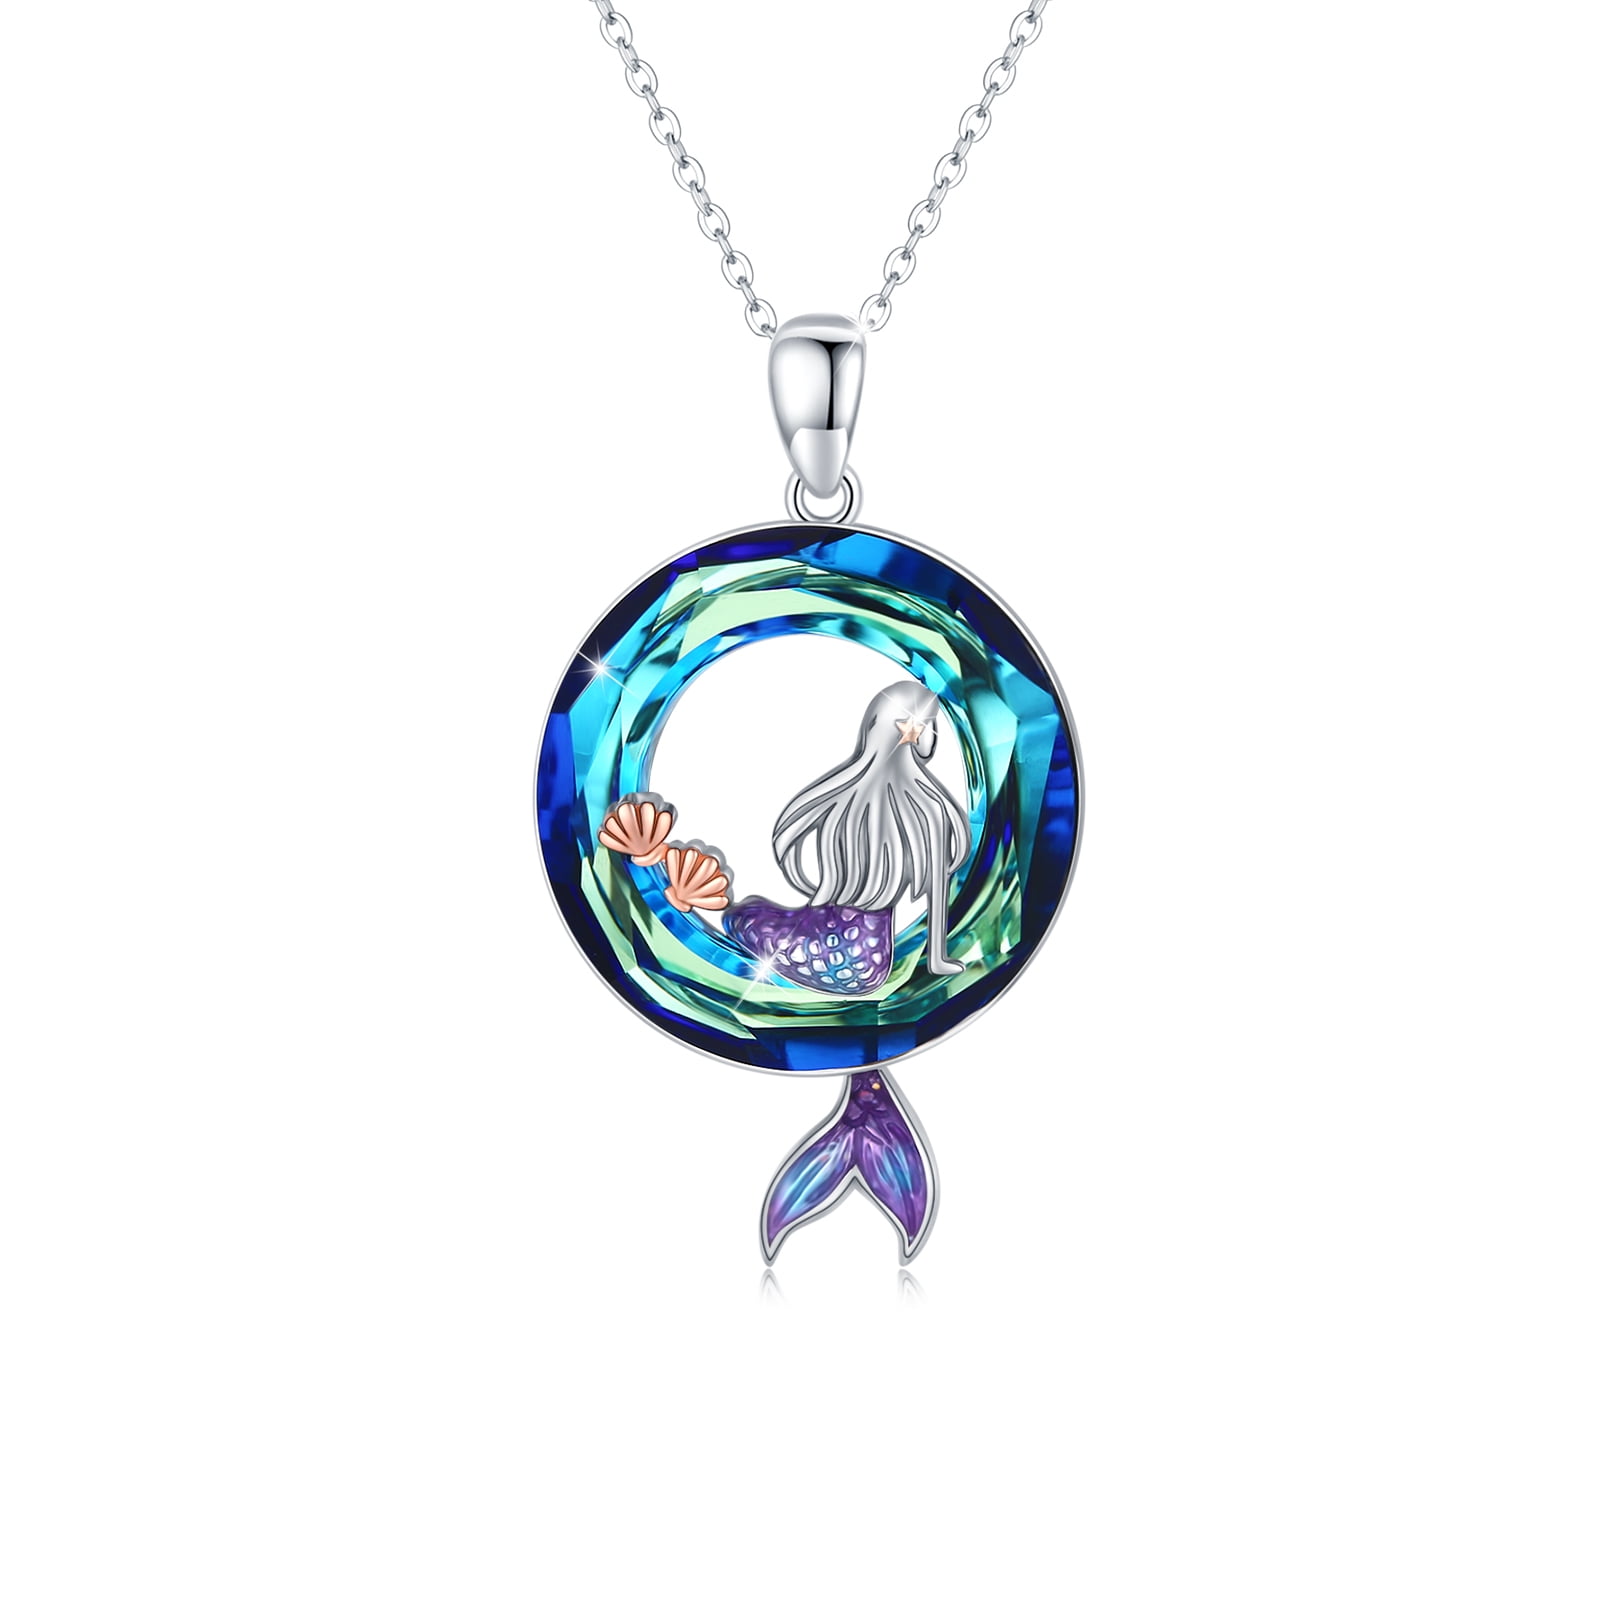 Hummingbird Necklace Gifts for Women Sterling Silver Bird Pendant Necklace with Blue/Purple Crystal Jewelry for Girls 